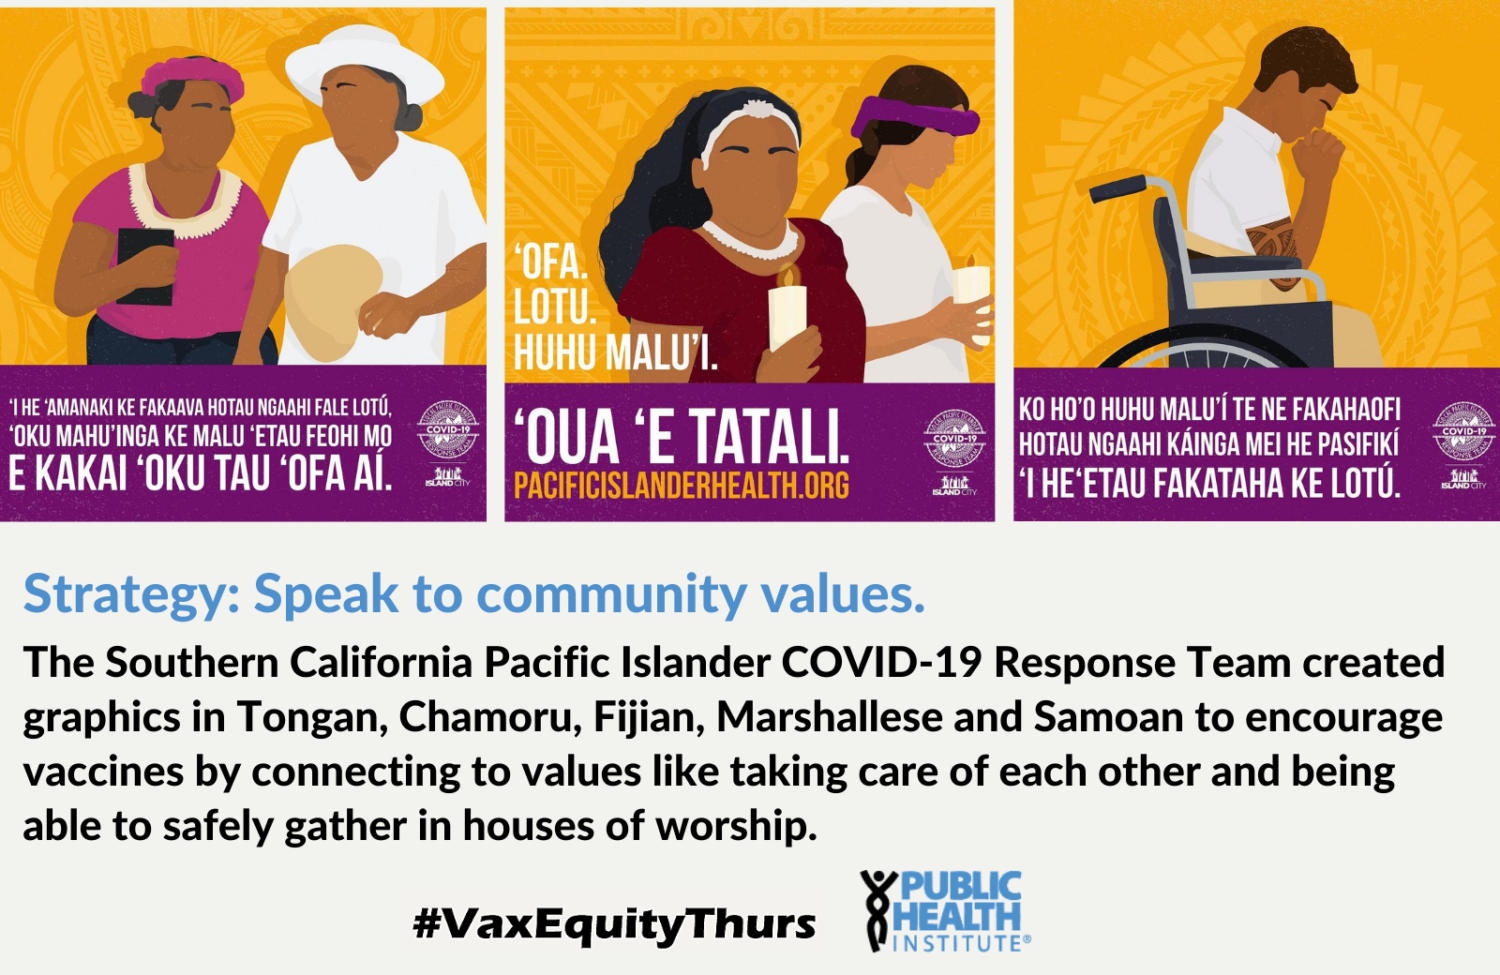 Strategy: Speak to community values. The Southern California Pacific Islander COVID-19 Response Team created graphics in Tongan, Chamoru, Fijian, Marshallese and Samoan to encourage vaccines by connecting to values like taking care of each other and being able to safely gather in houses of worship.